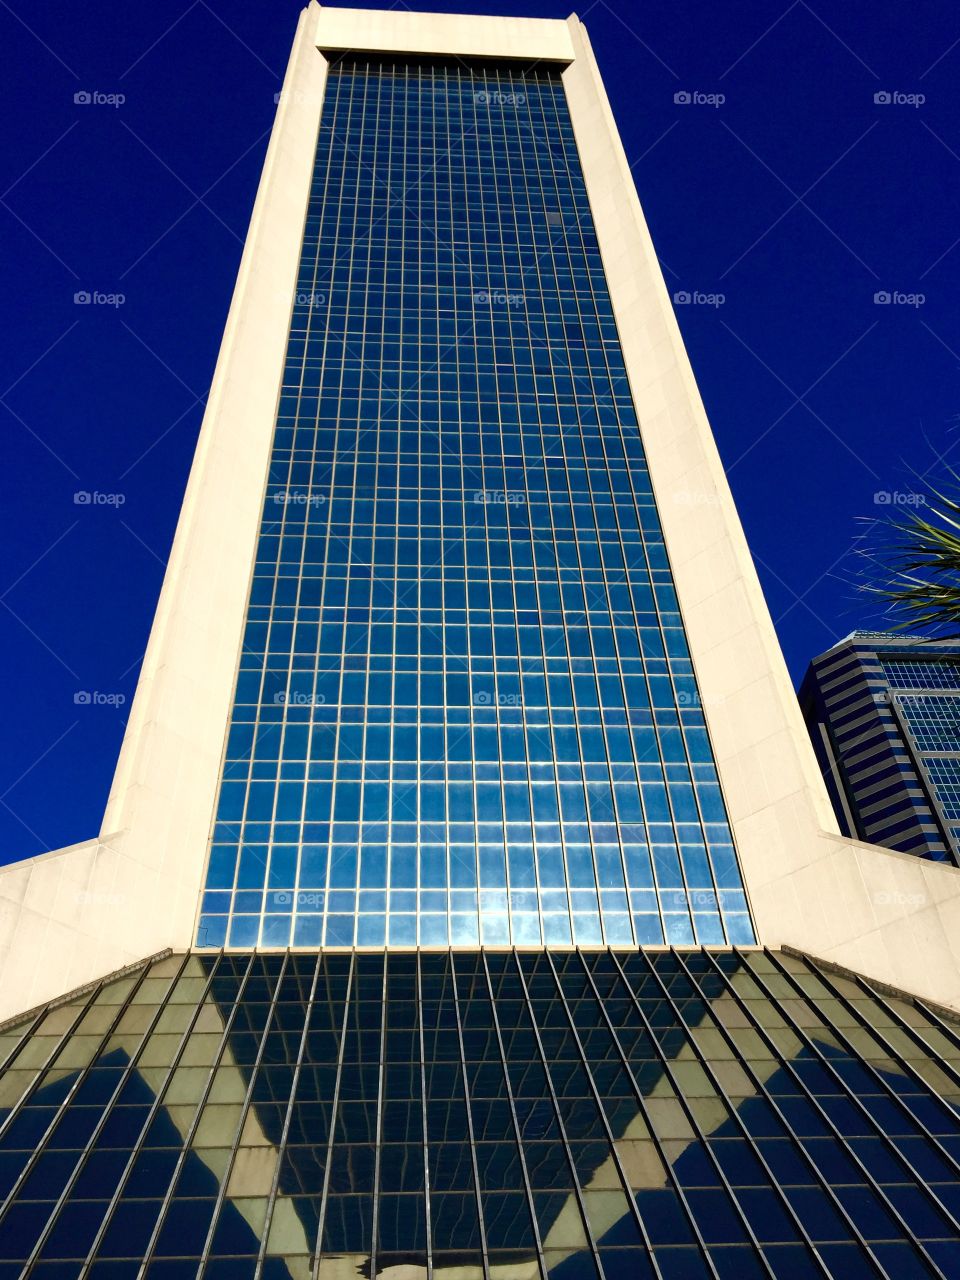 Building Reflects Itself. Building in downtown Jacksonville lower floors windows are at an angle and reflects upper part of skyscraper.  